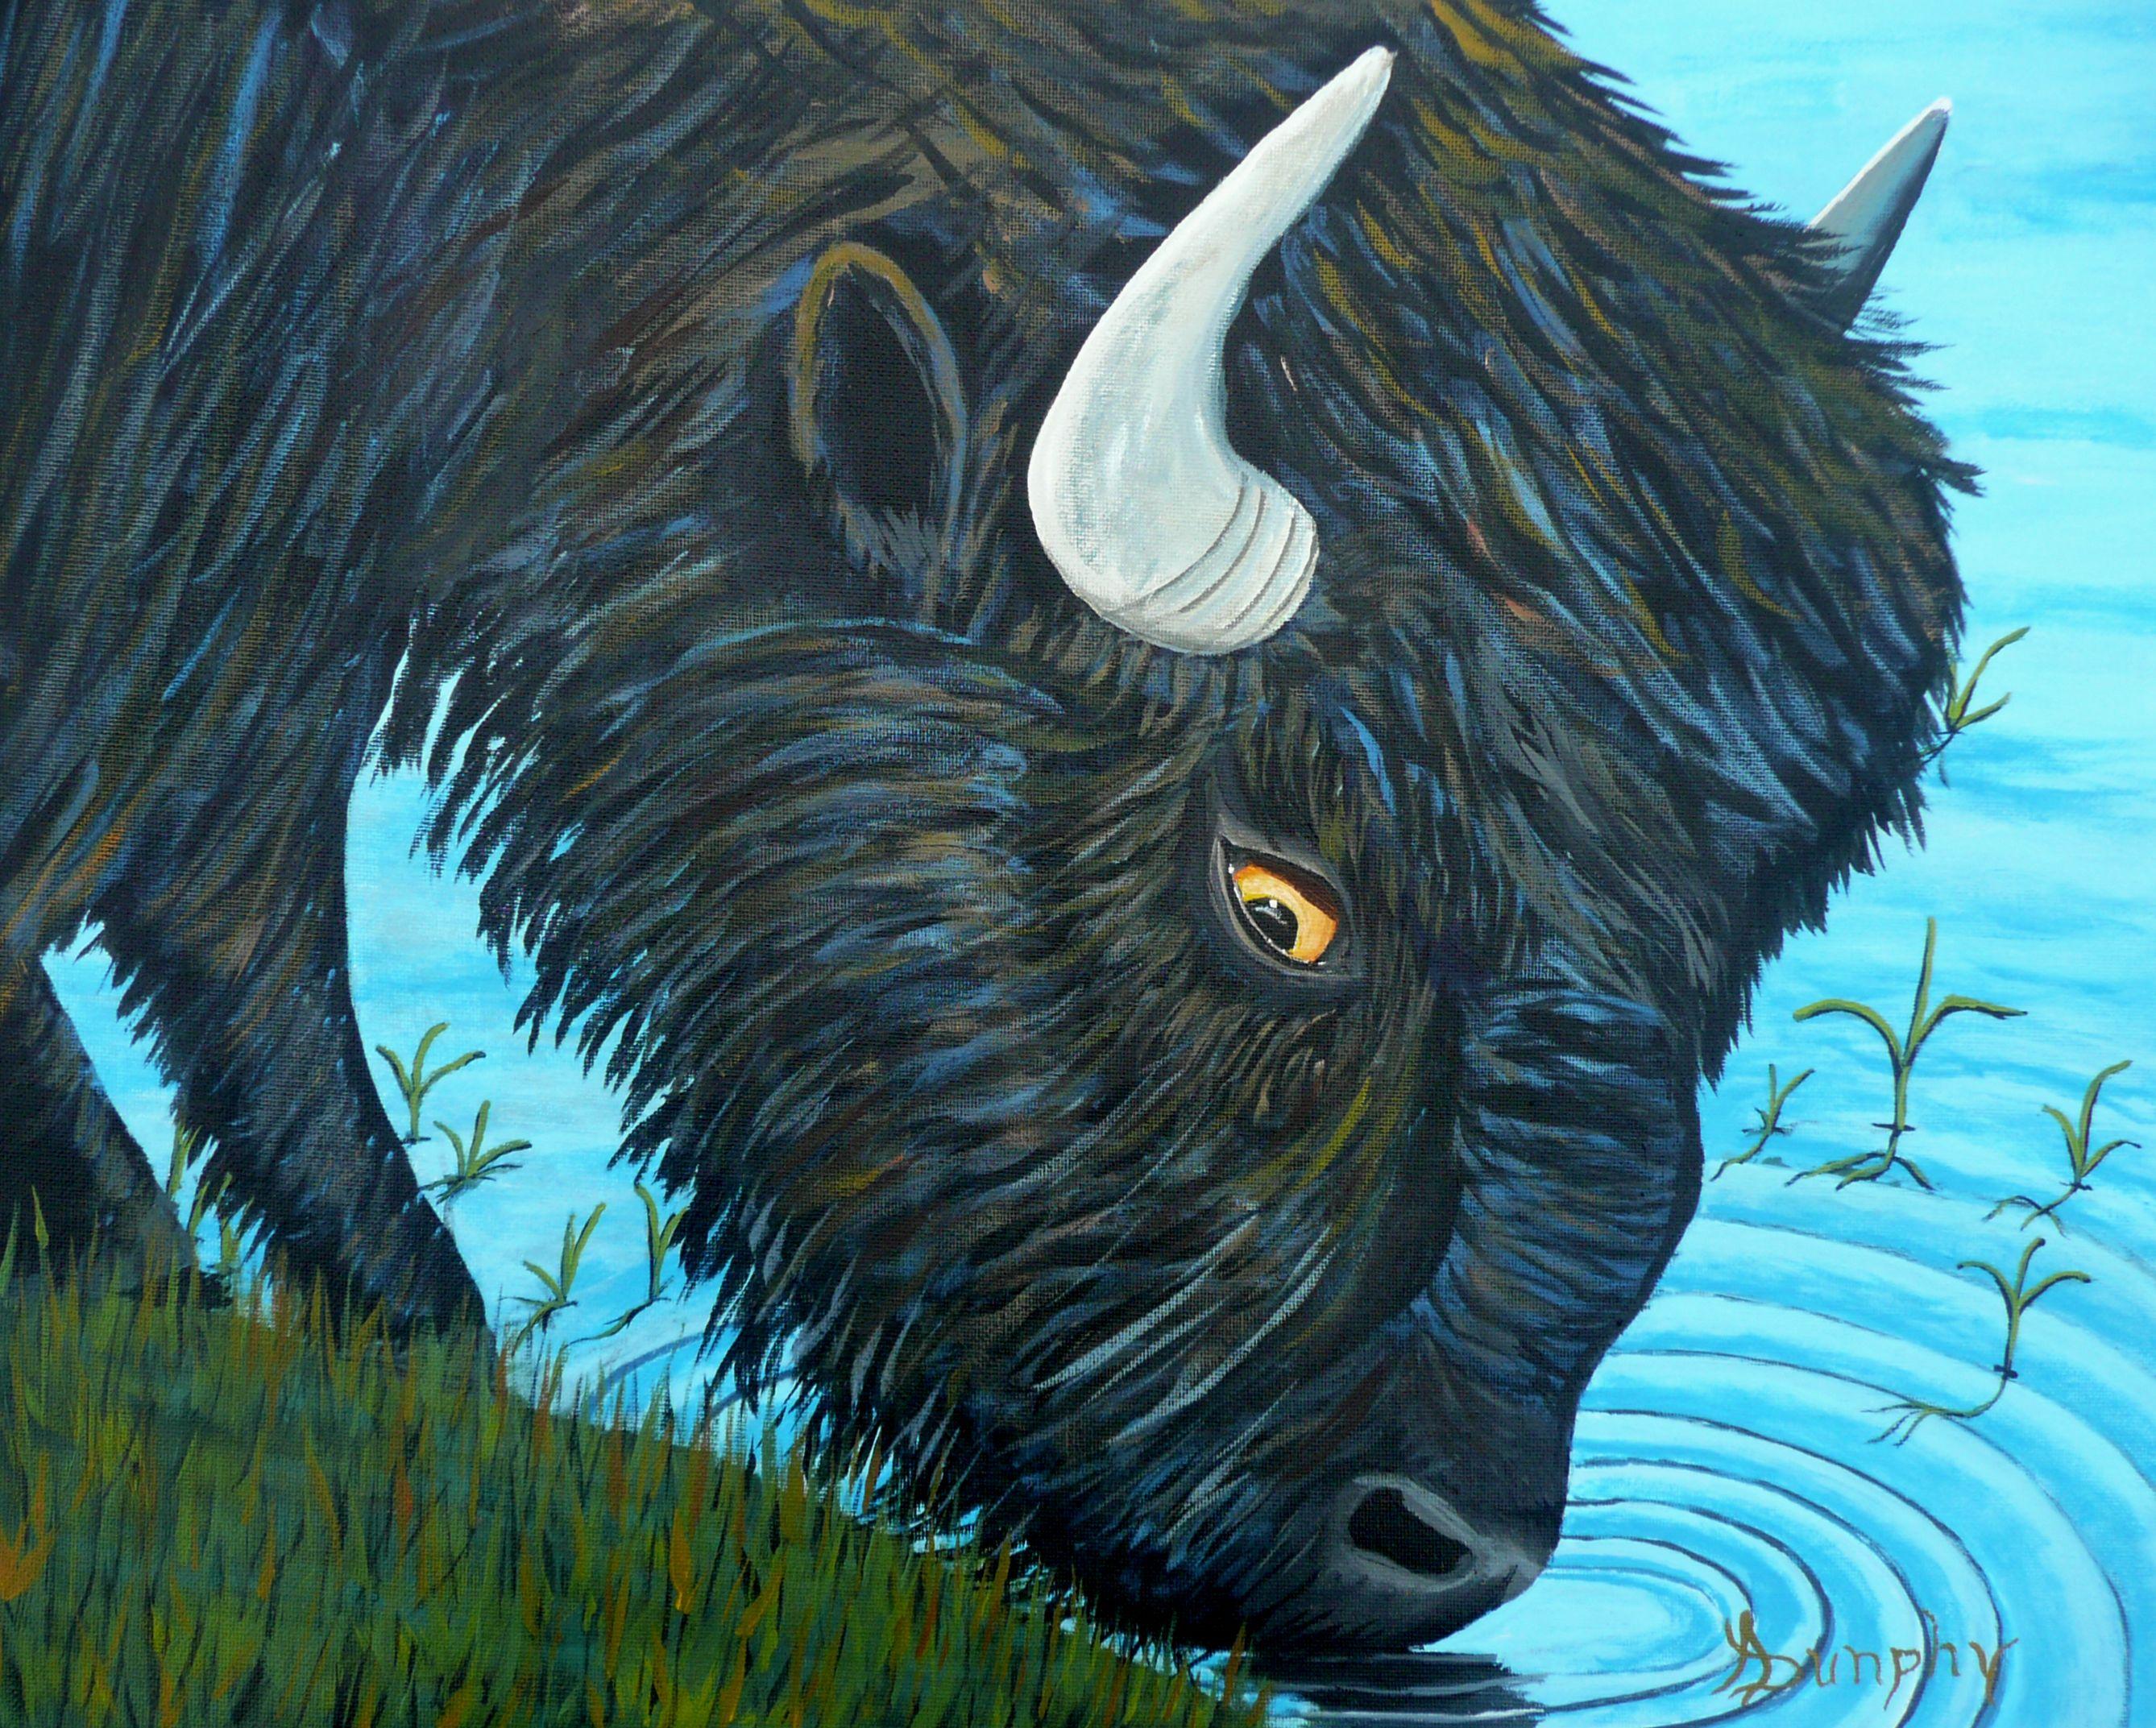 Shaggy Bison, Painting, Acrylic on Canvas